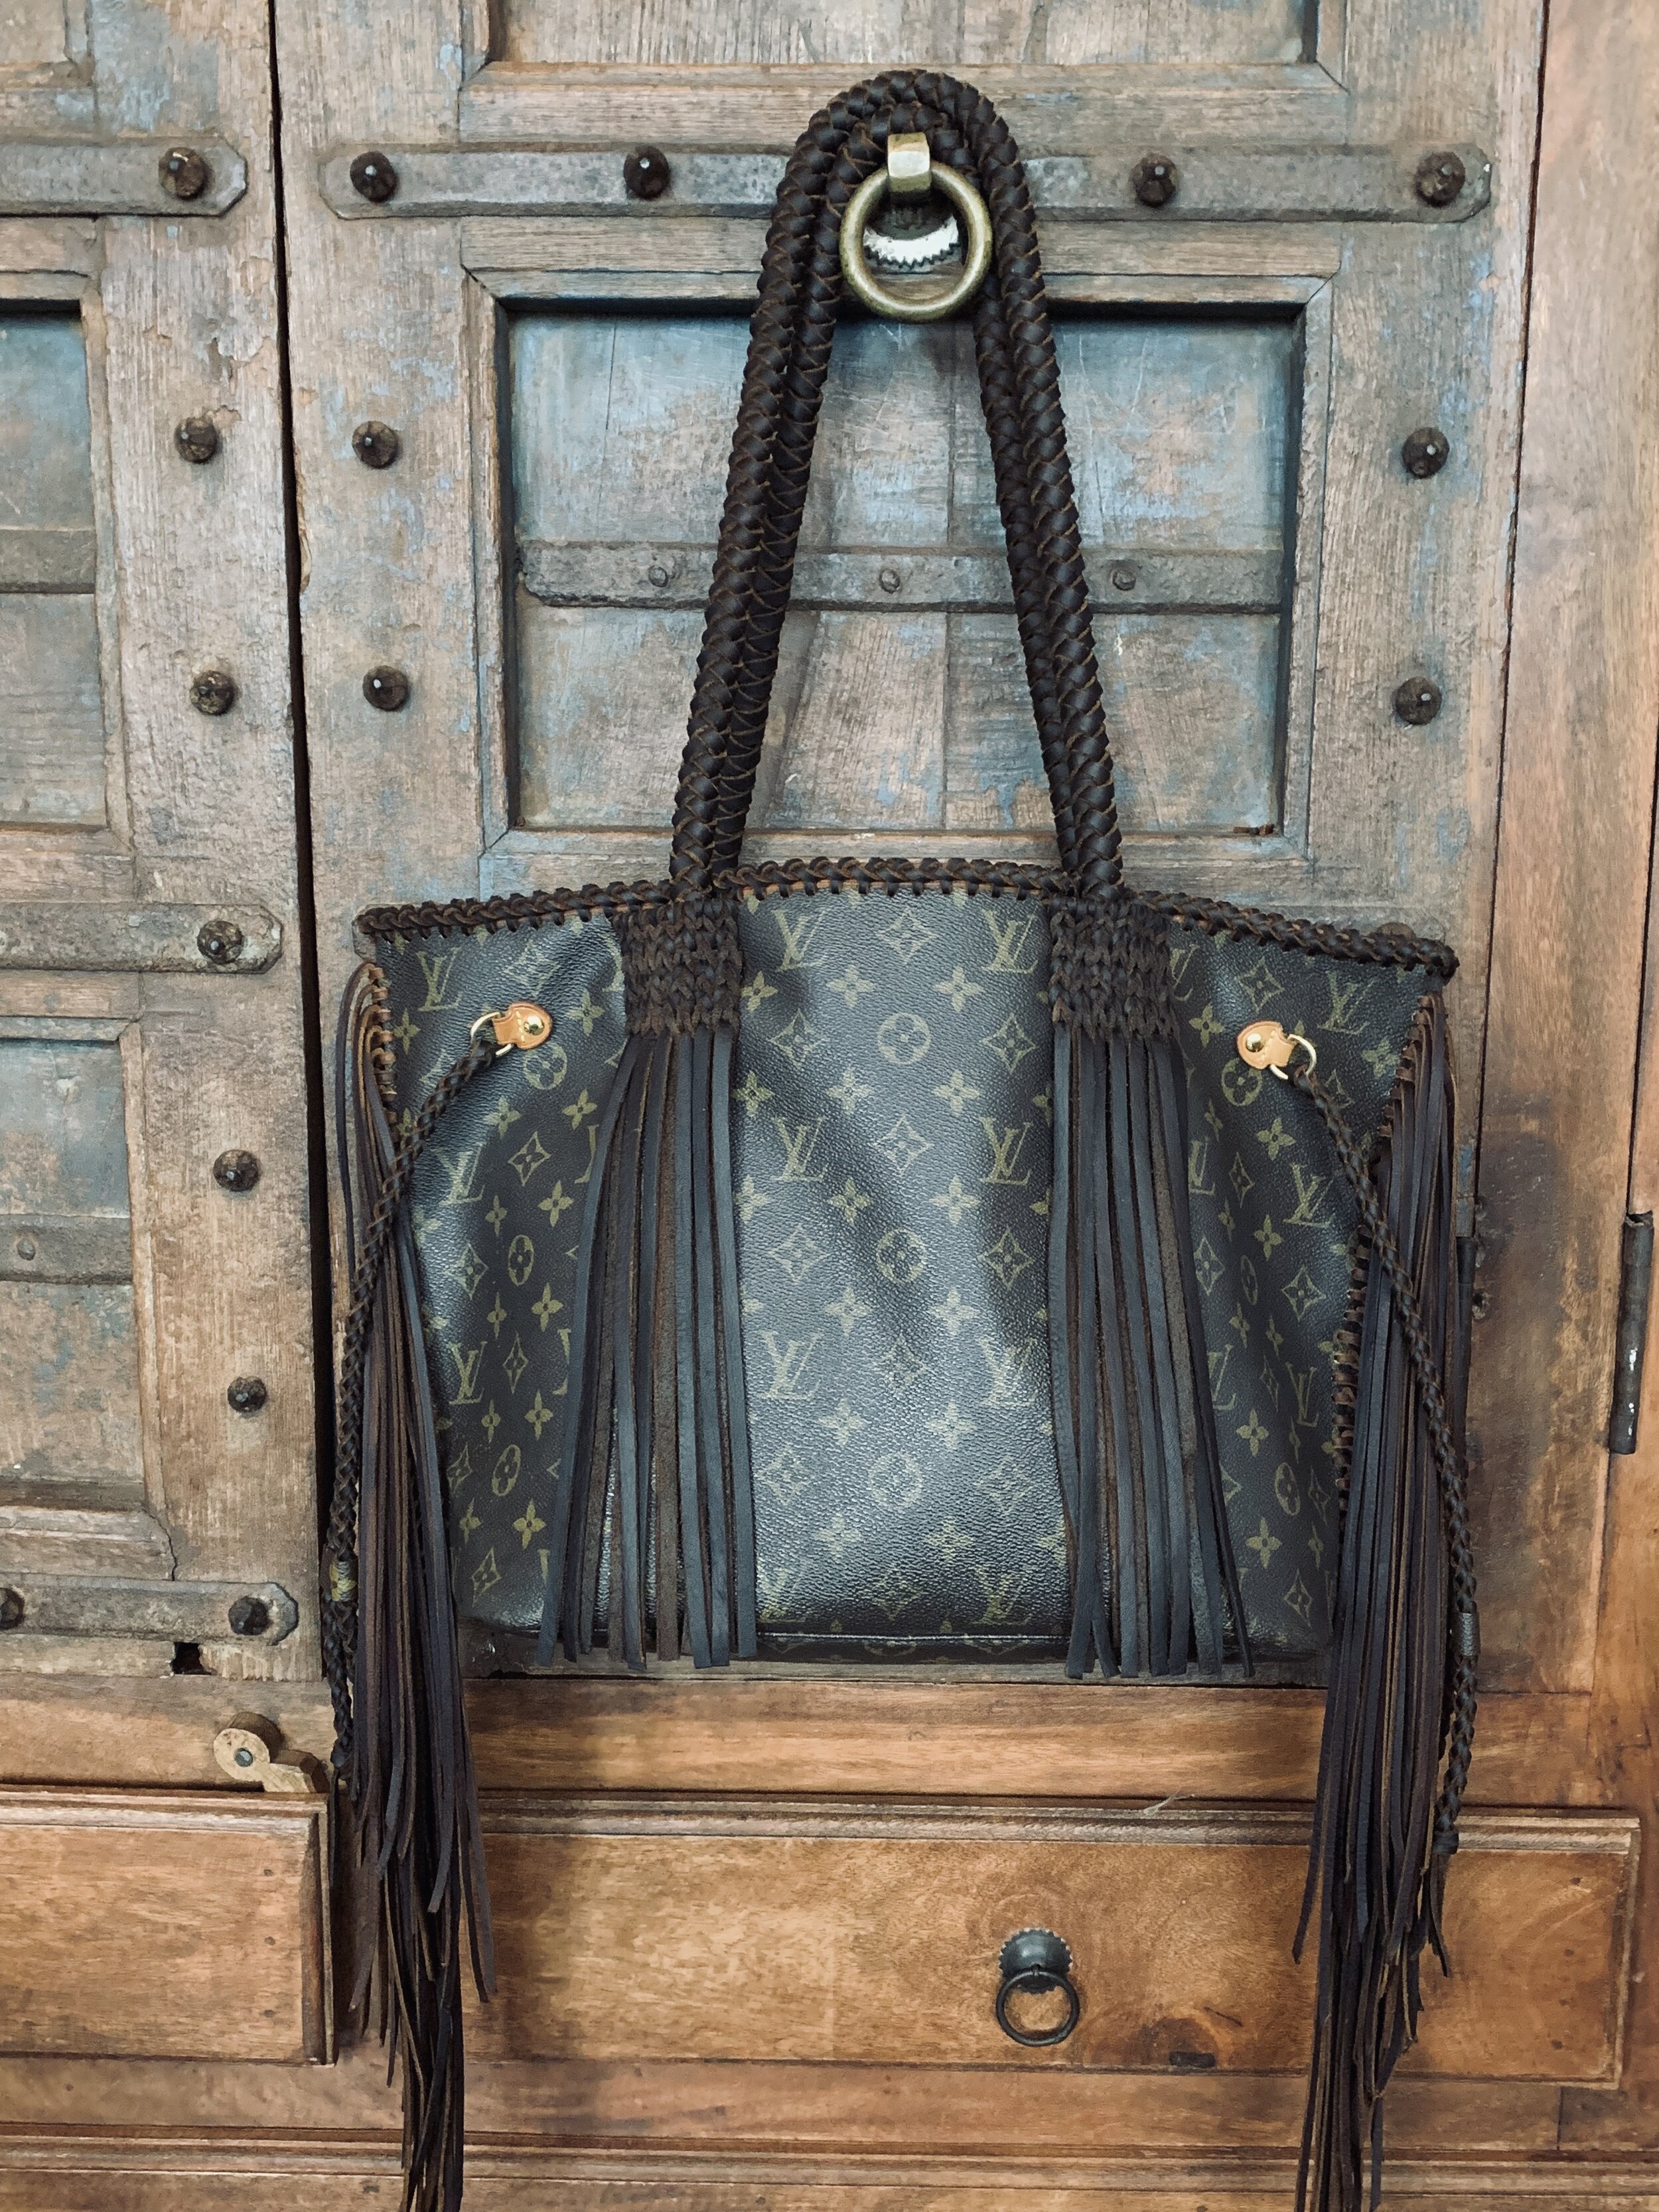 Refurbished Louis Vuitton With Fringe